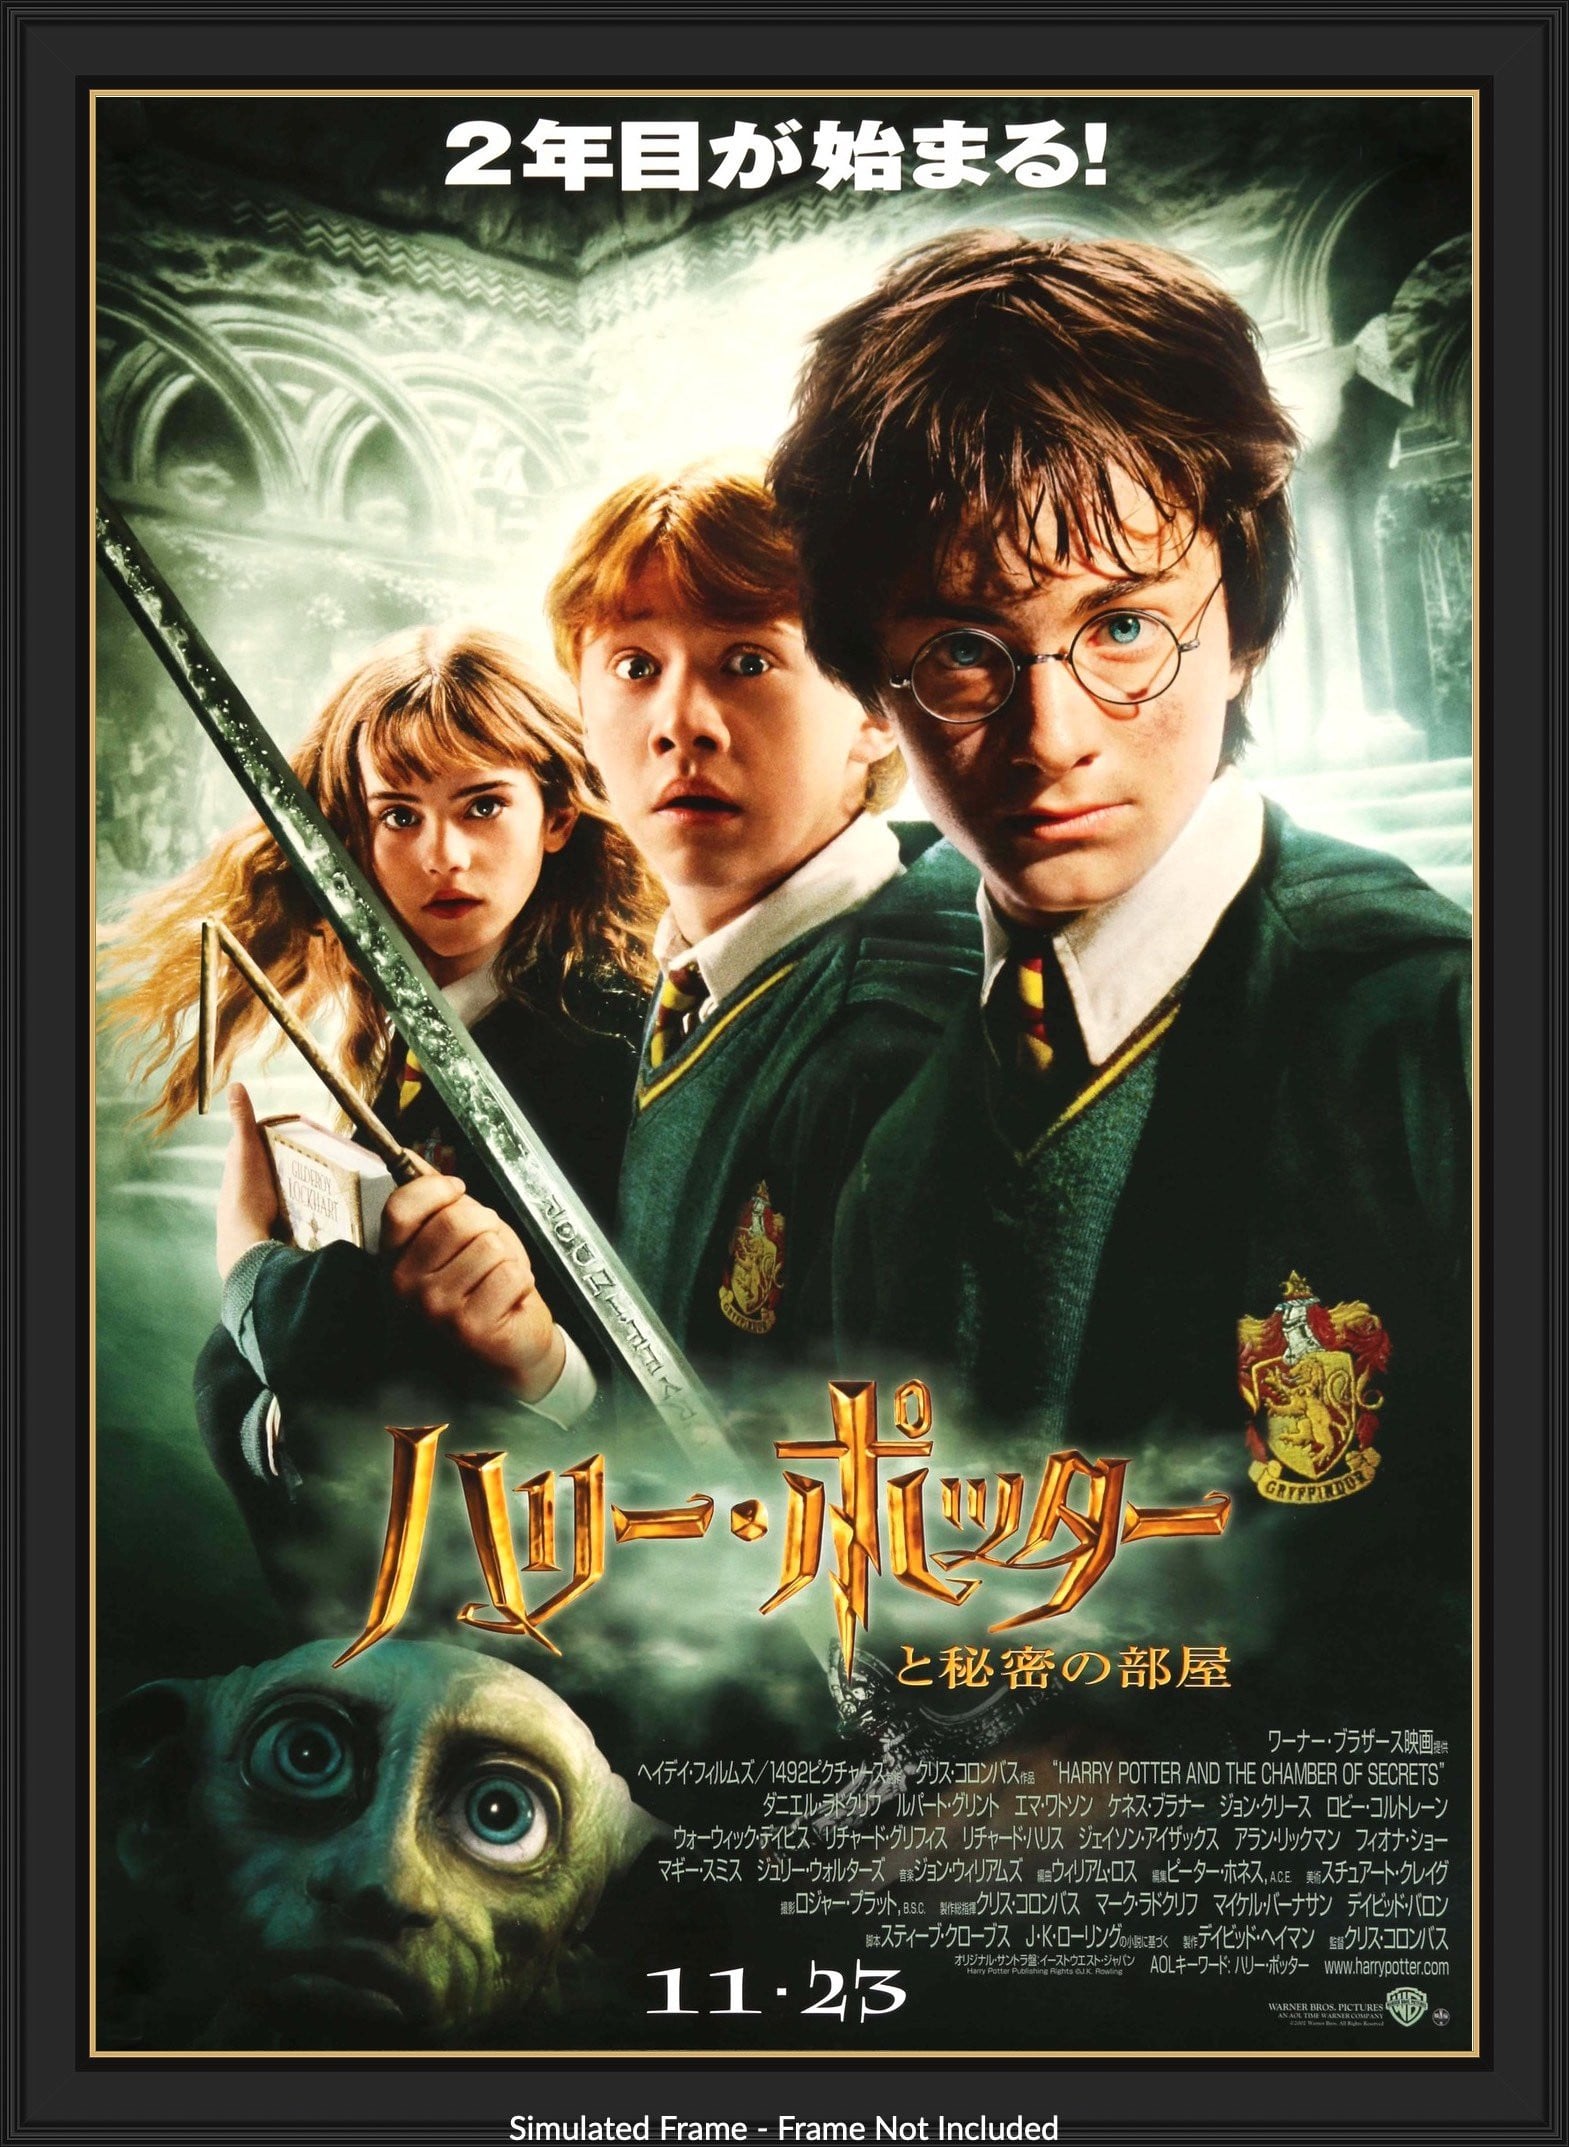 20 Years of Movie Magic Harry Potter framed poster - Boutique